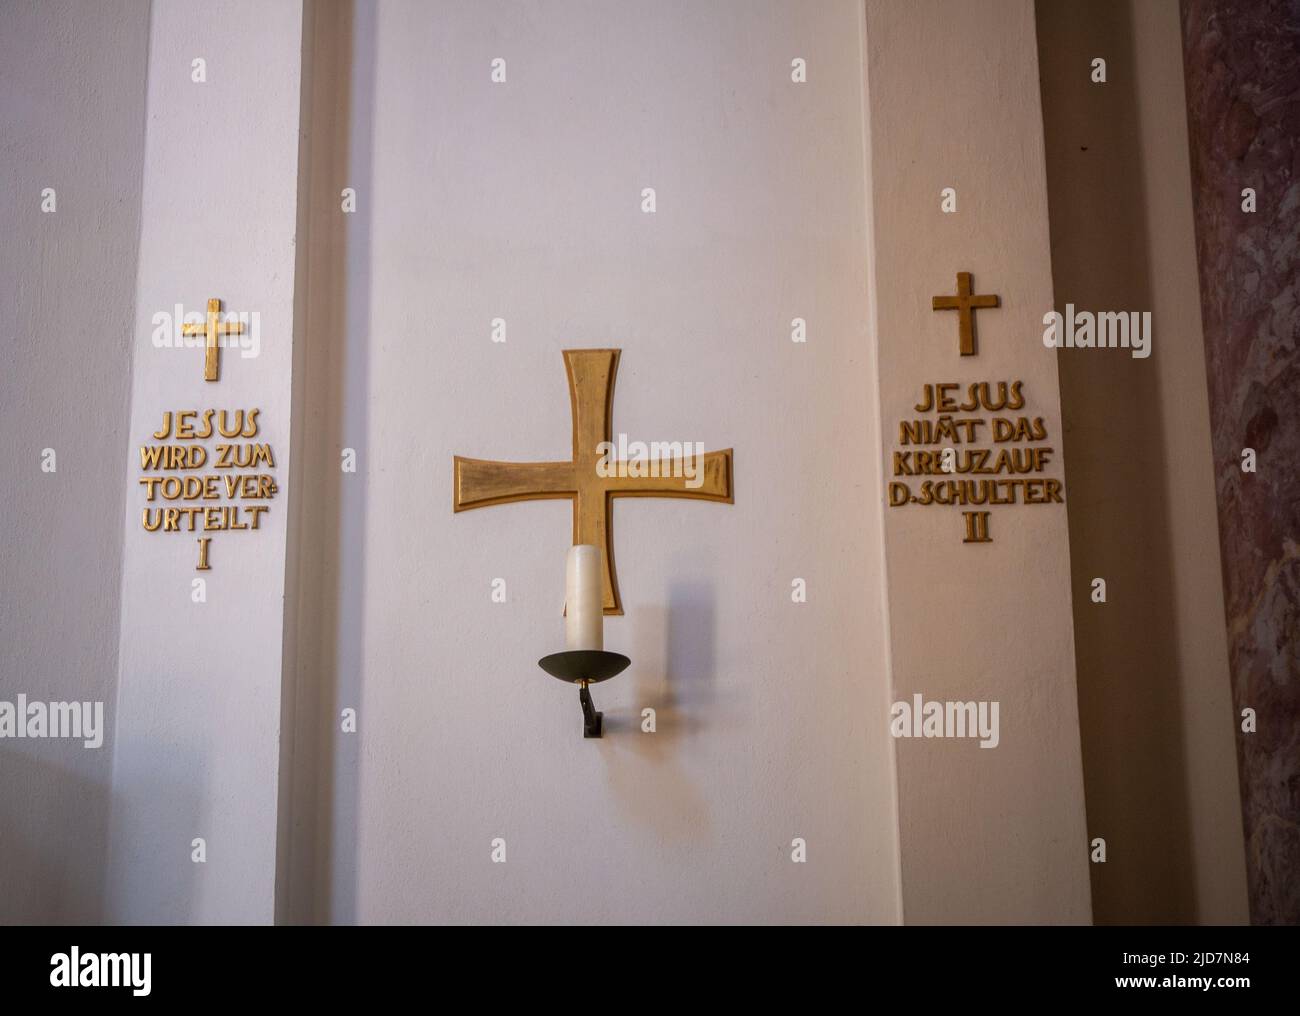 Stations of the cross in german inside a church Stock Photo